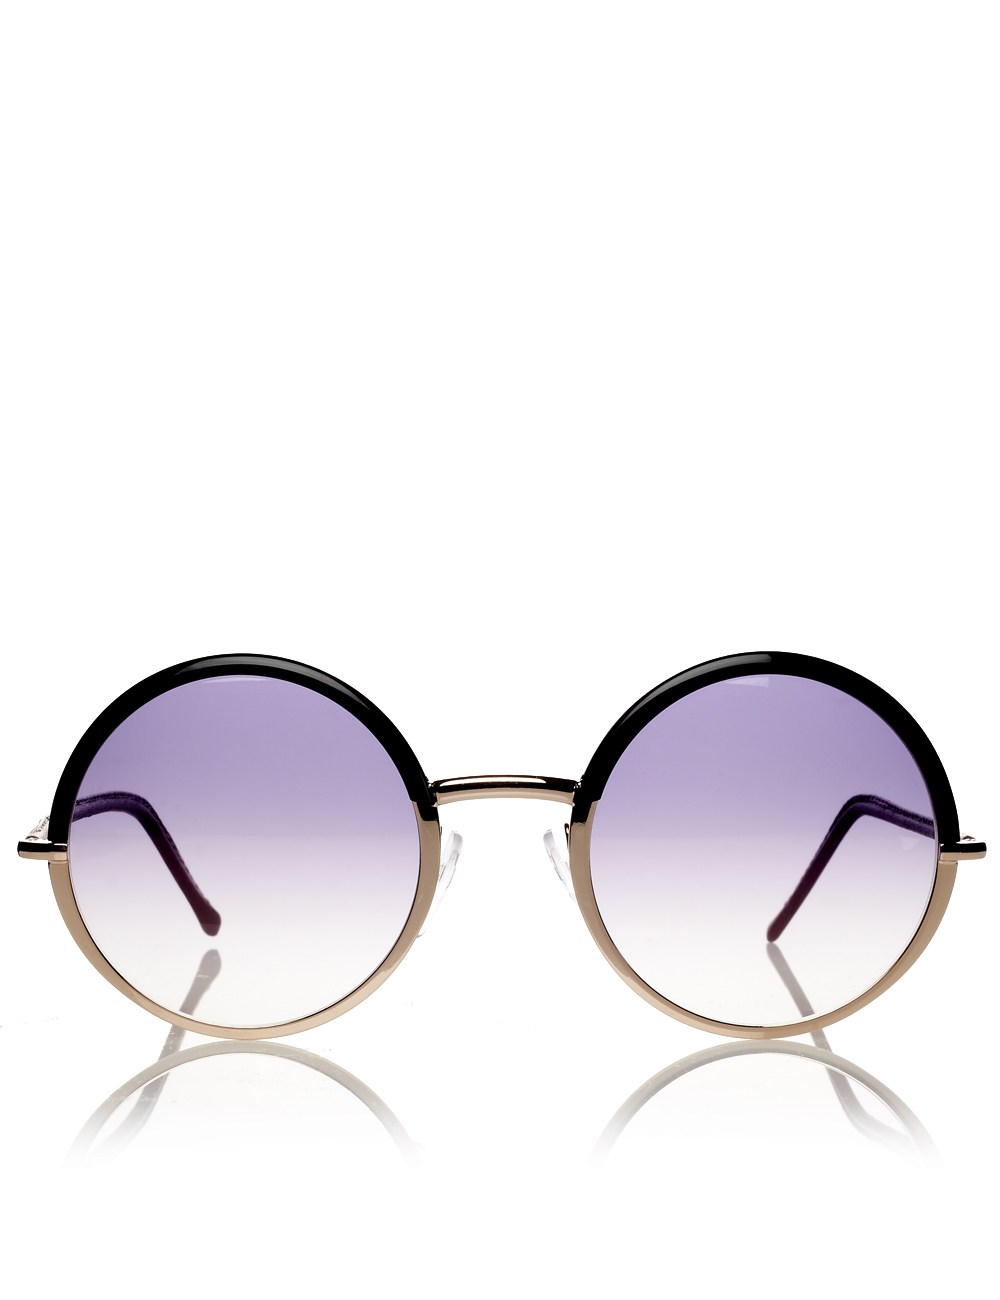 Black Oversized Round Sunglasses | Cutler and Gross | Avenue32